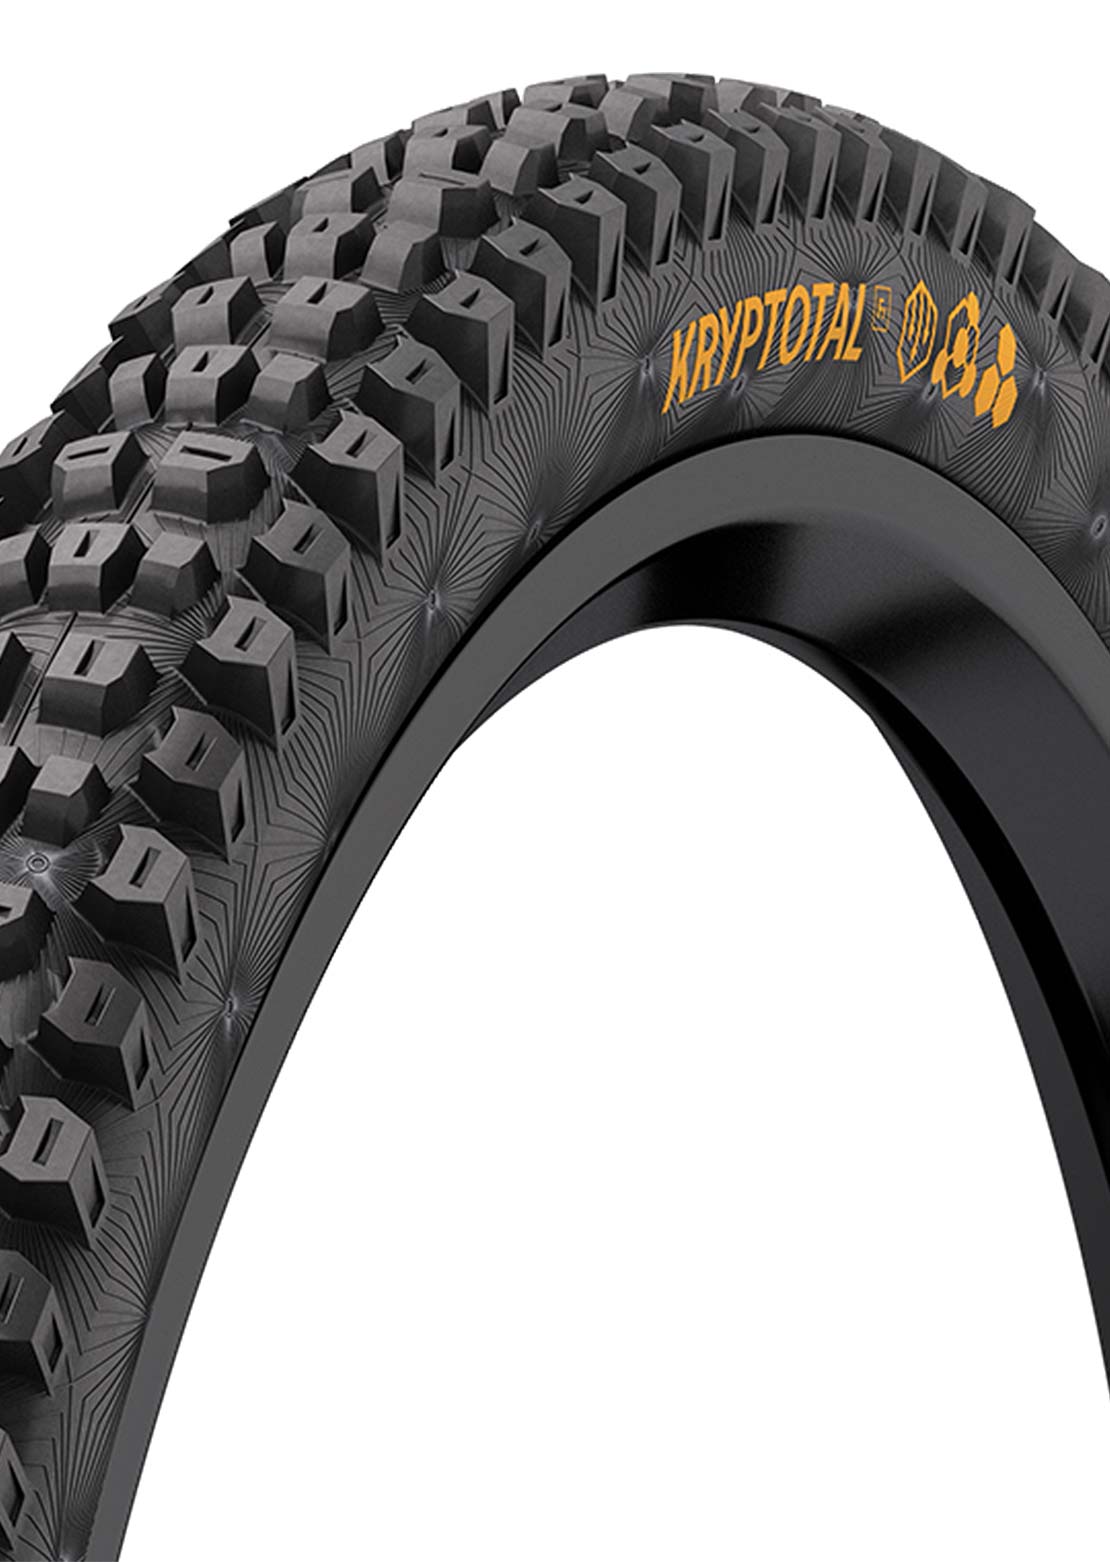 Continental Kryptotal-F DH Casing SuperSoft Folding Mountain Bike Tire - 29&quot; x 2.4&quot;